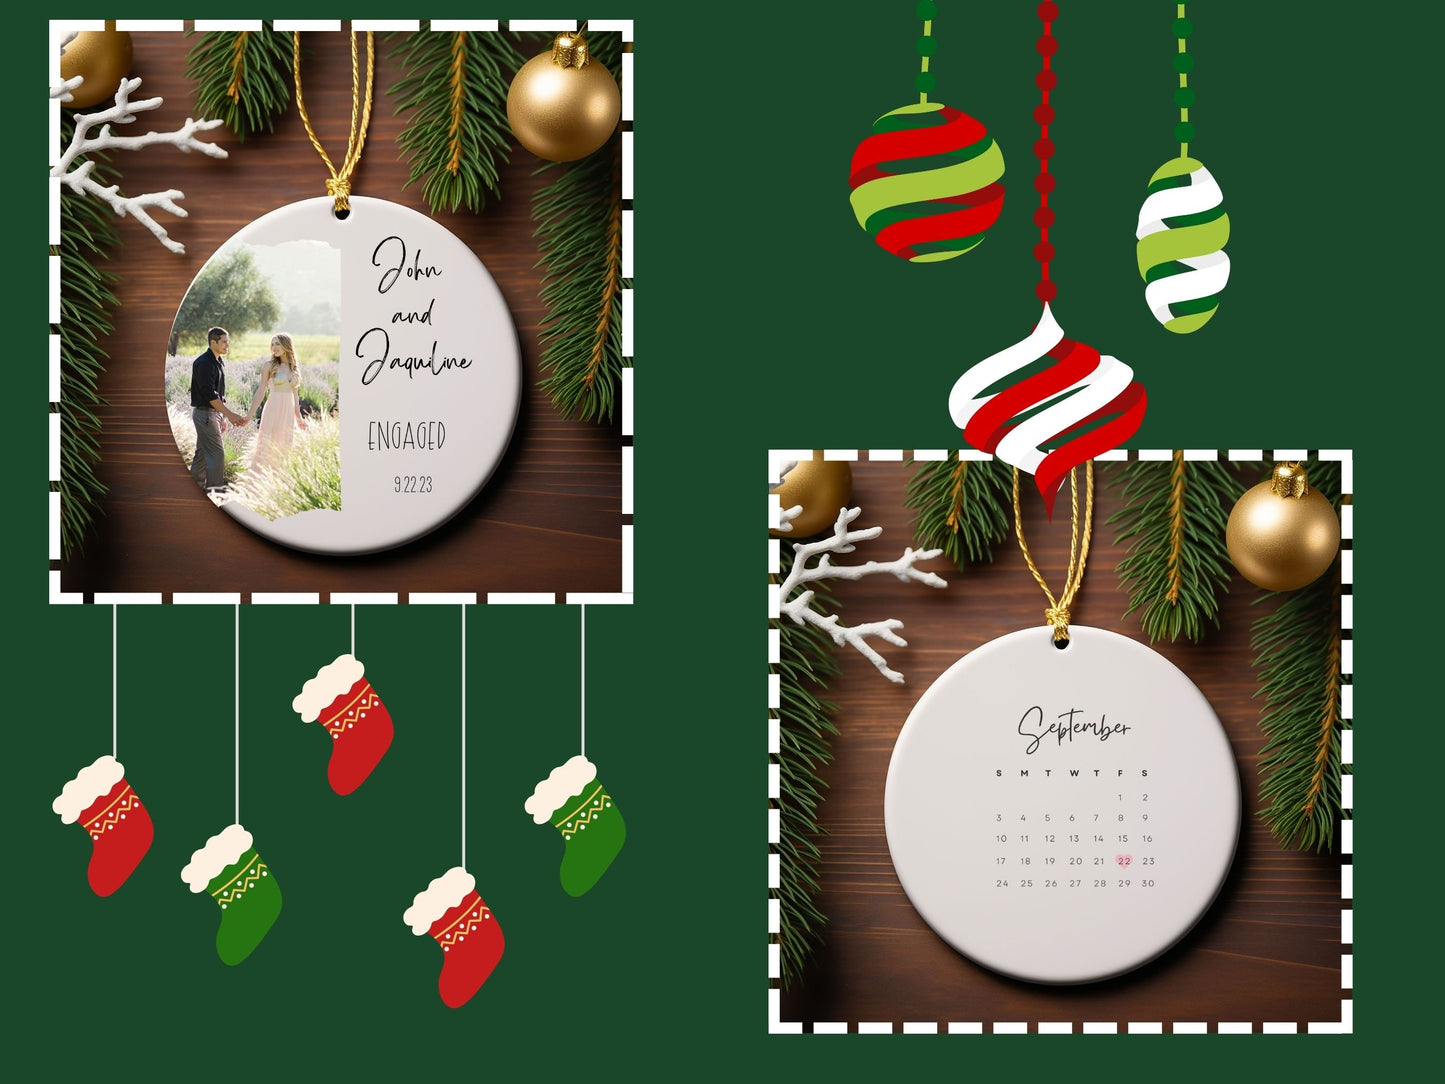 Customized Engagement Christmas Ornament: Personalized Couple's Keepsake for Our First Christmas, Engaged Photo Ornament